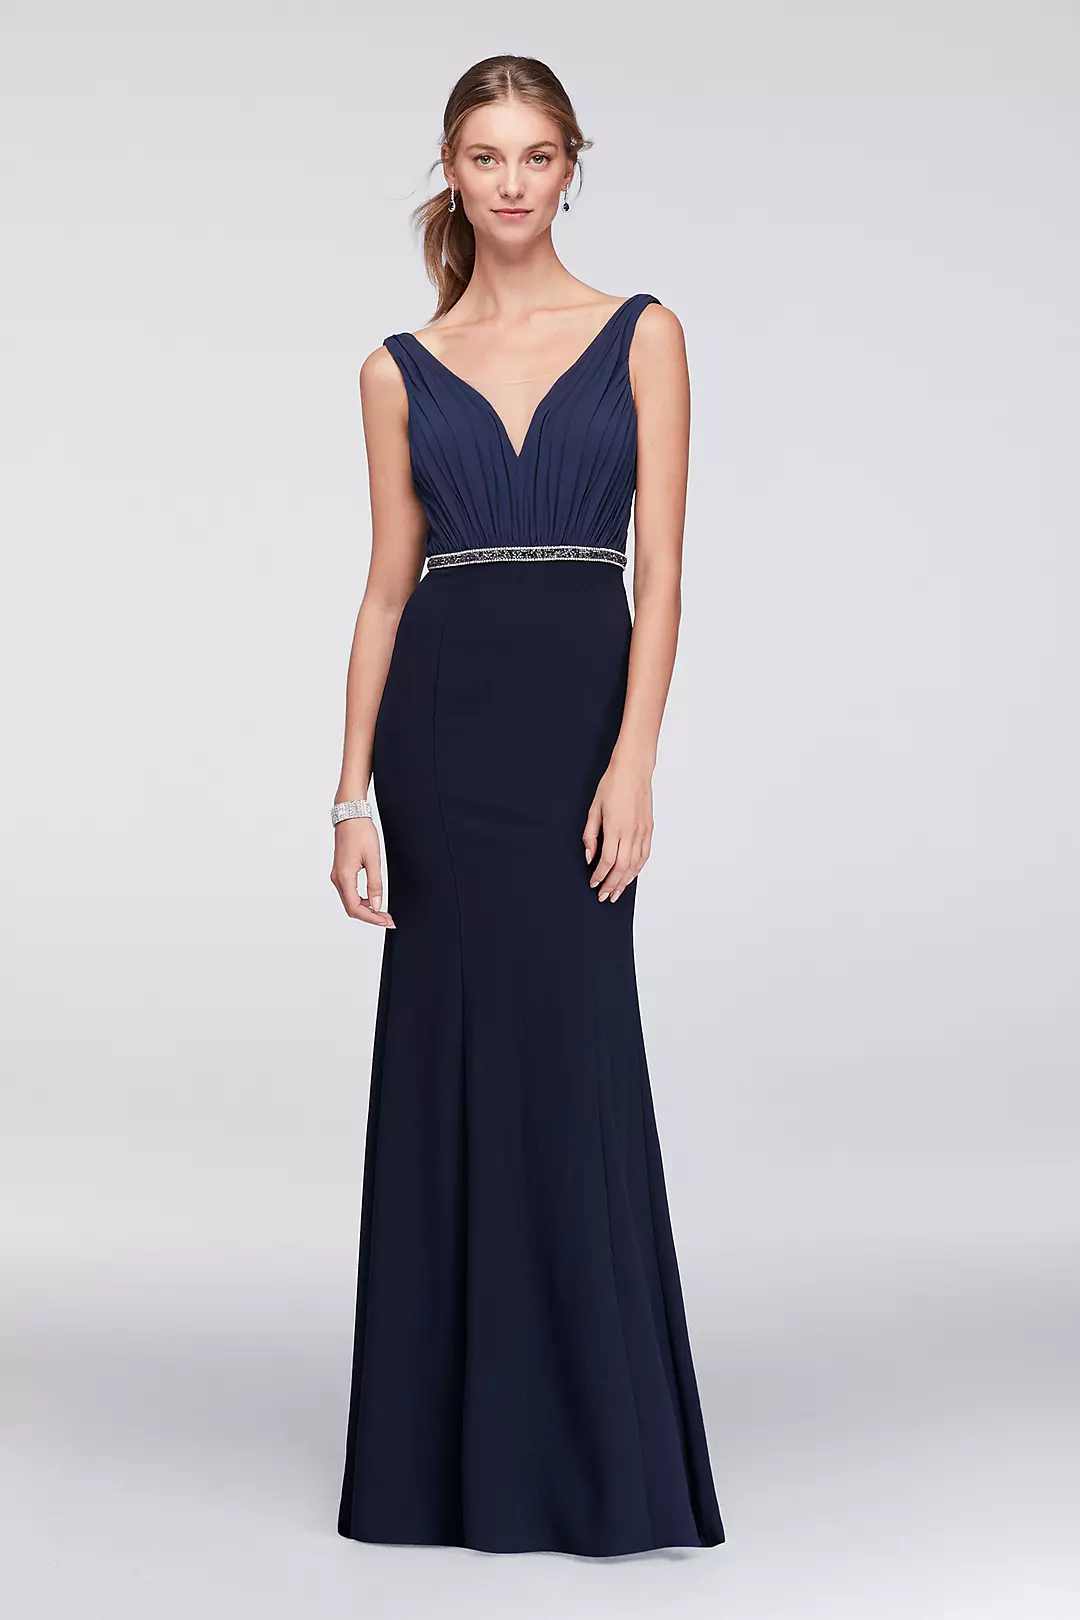 Chiffon and Crepe Plunge-Front Gown Image